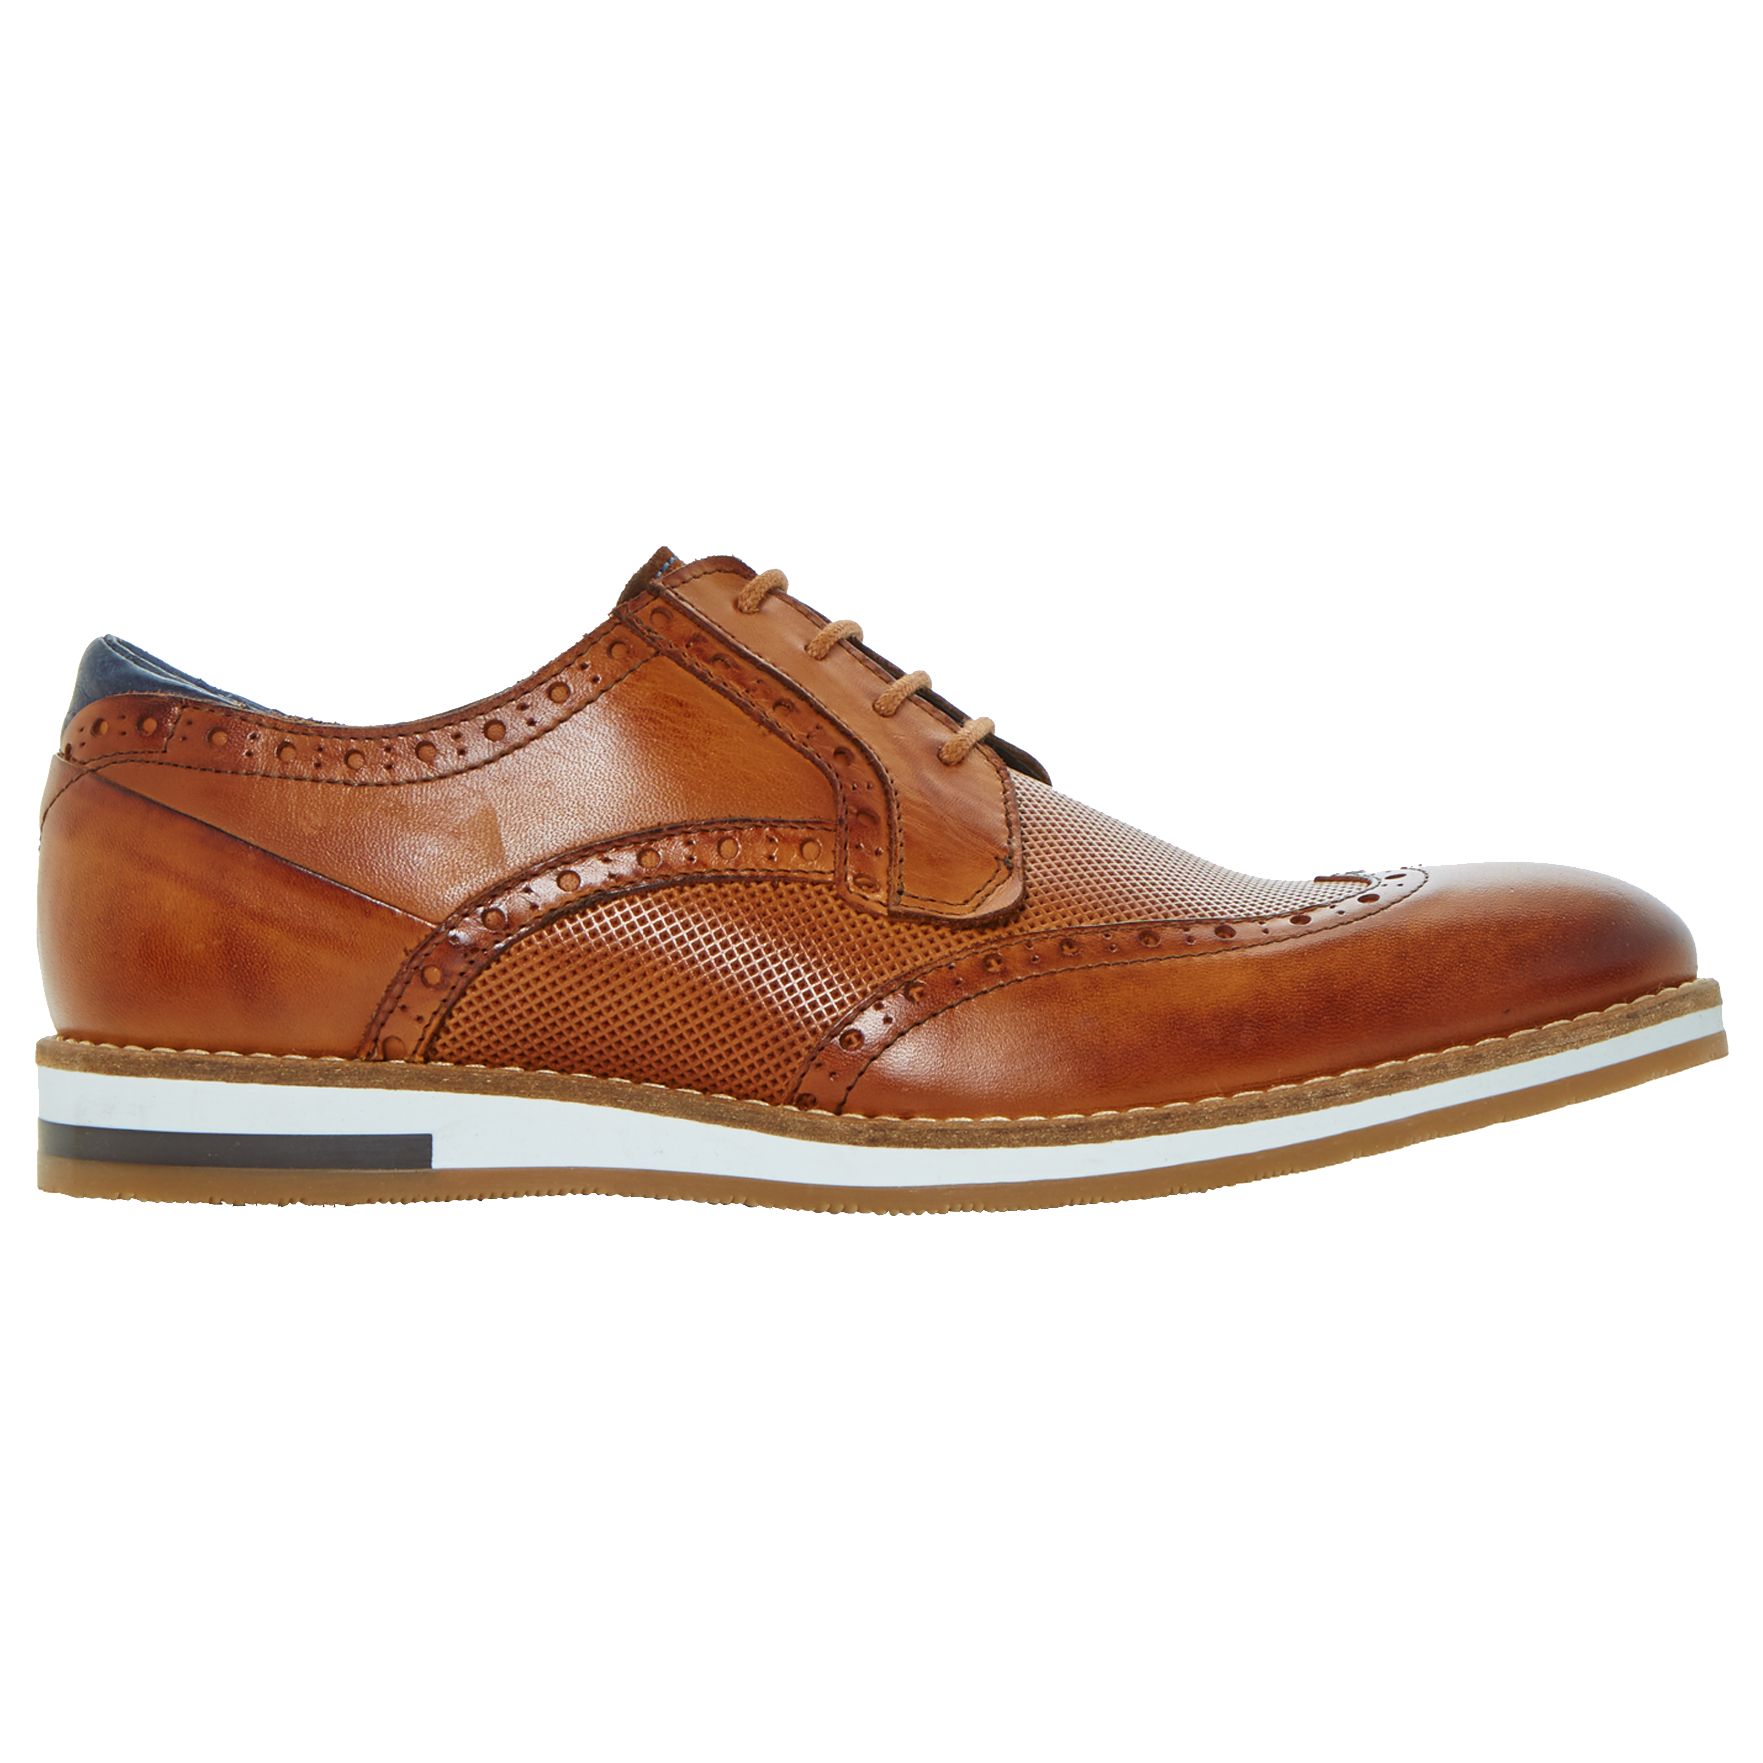 Bertie Baker Hill Gibson Leather Wingtip Shoes, Tan Leather, 7